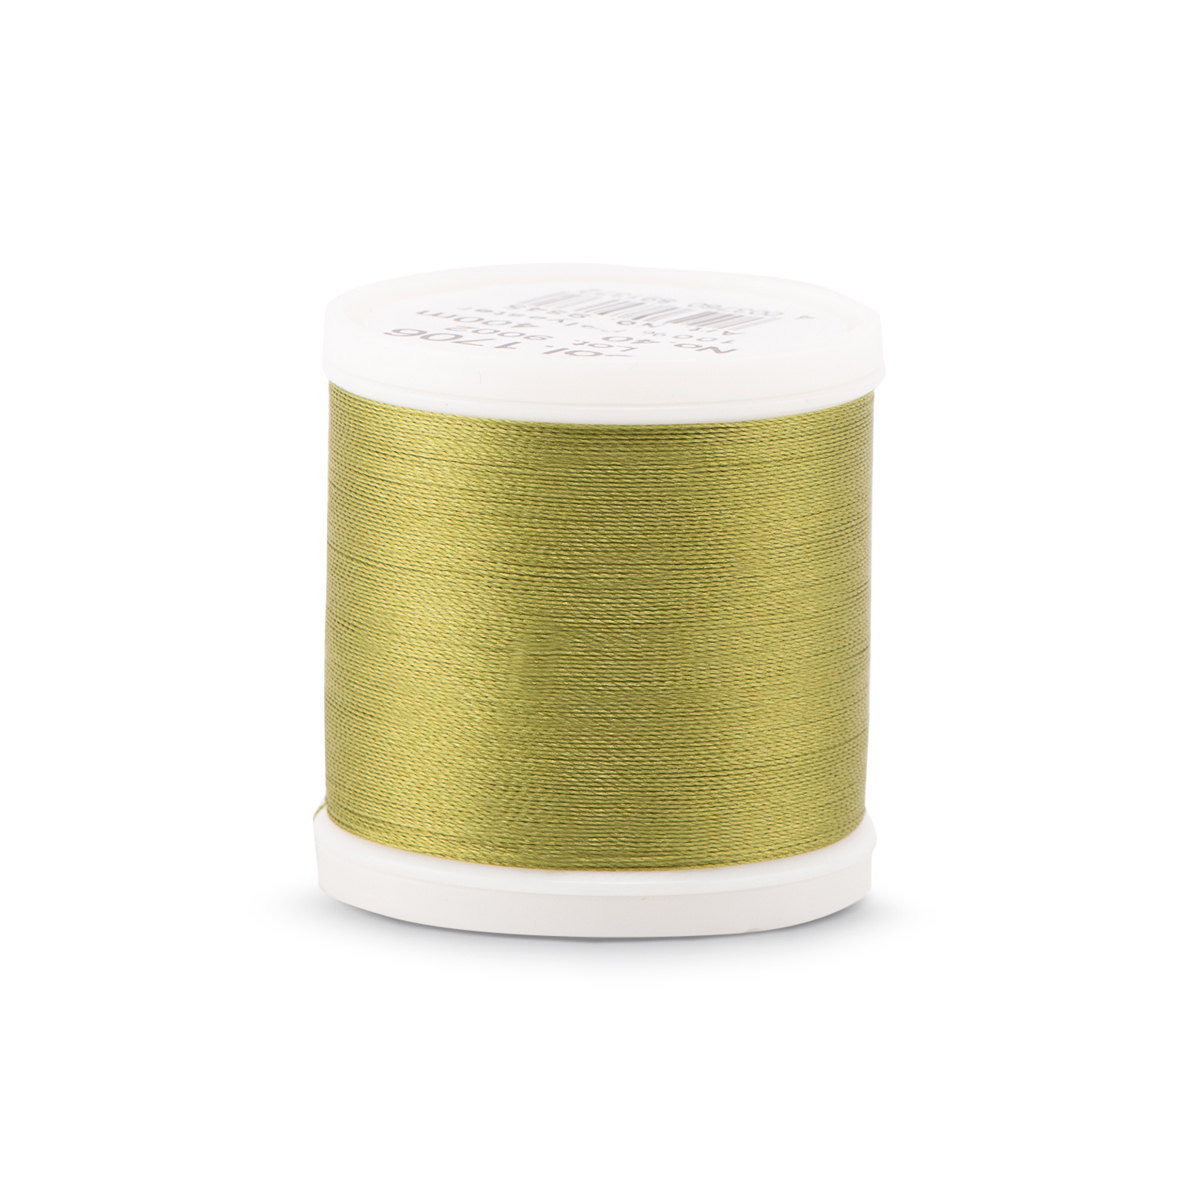 madeira embroidery thread,polyester filament yarn